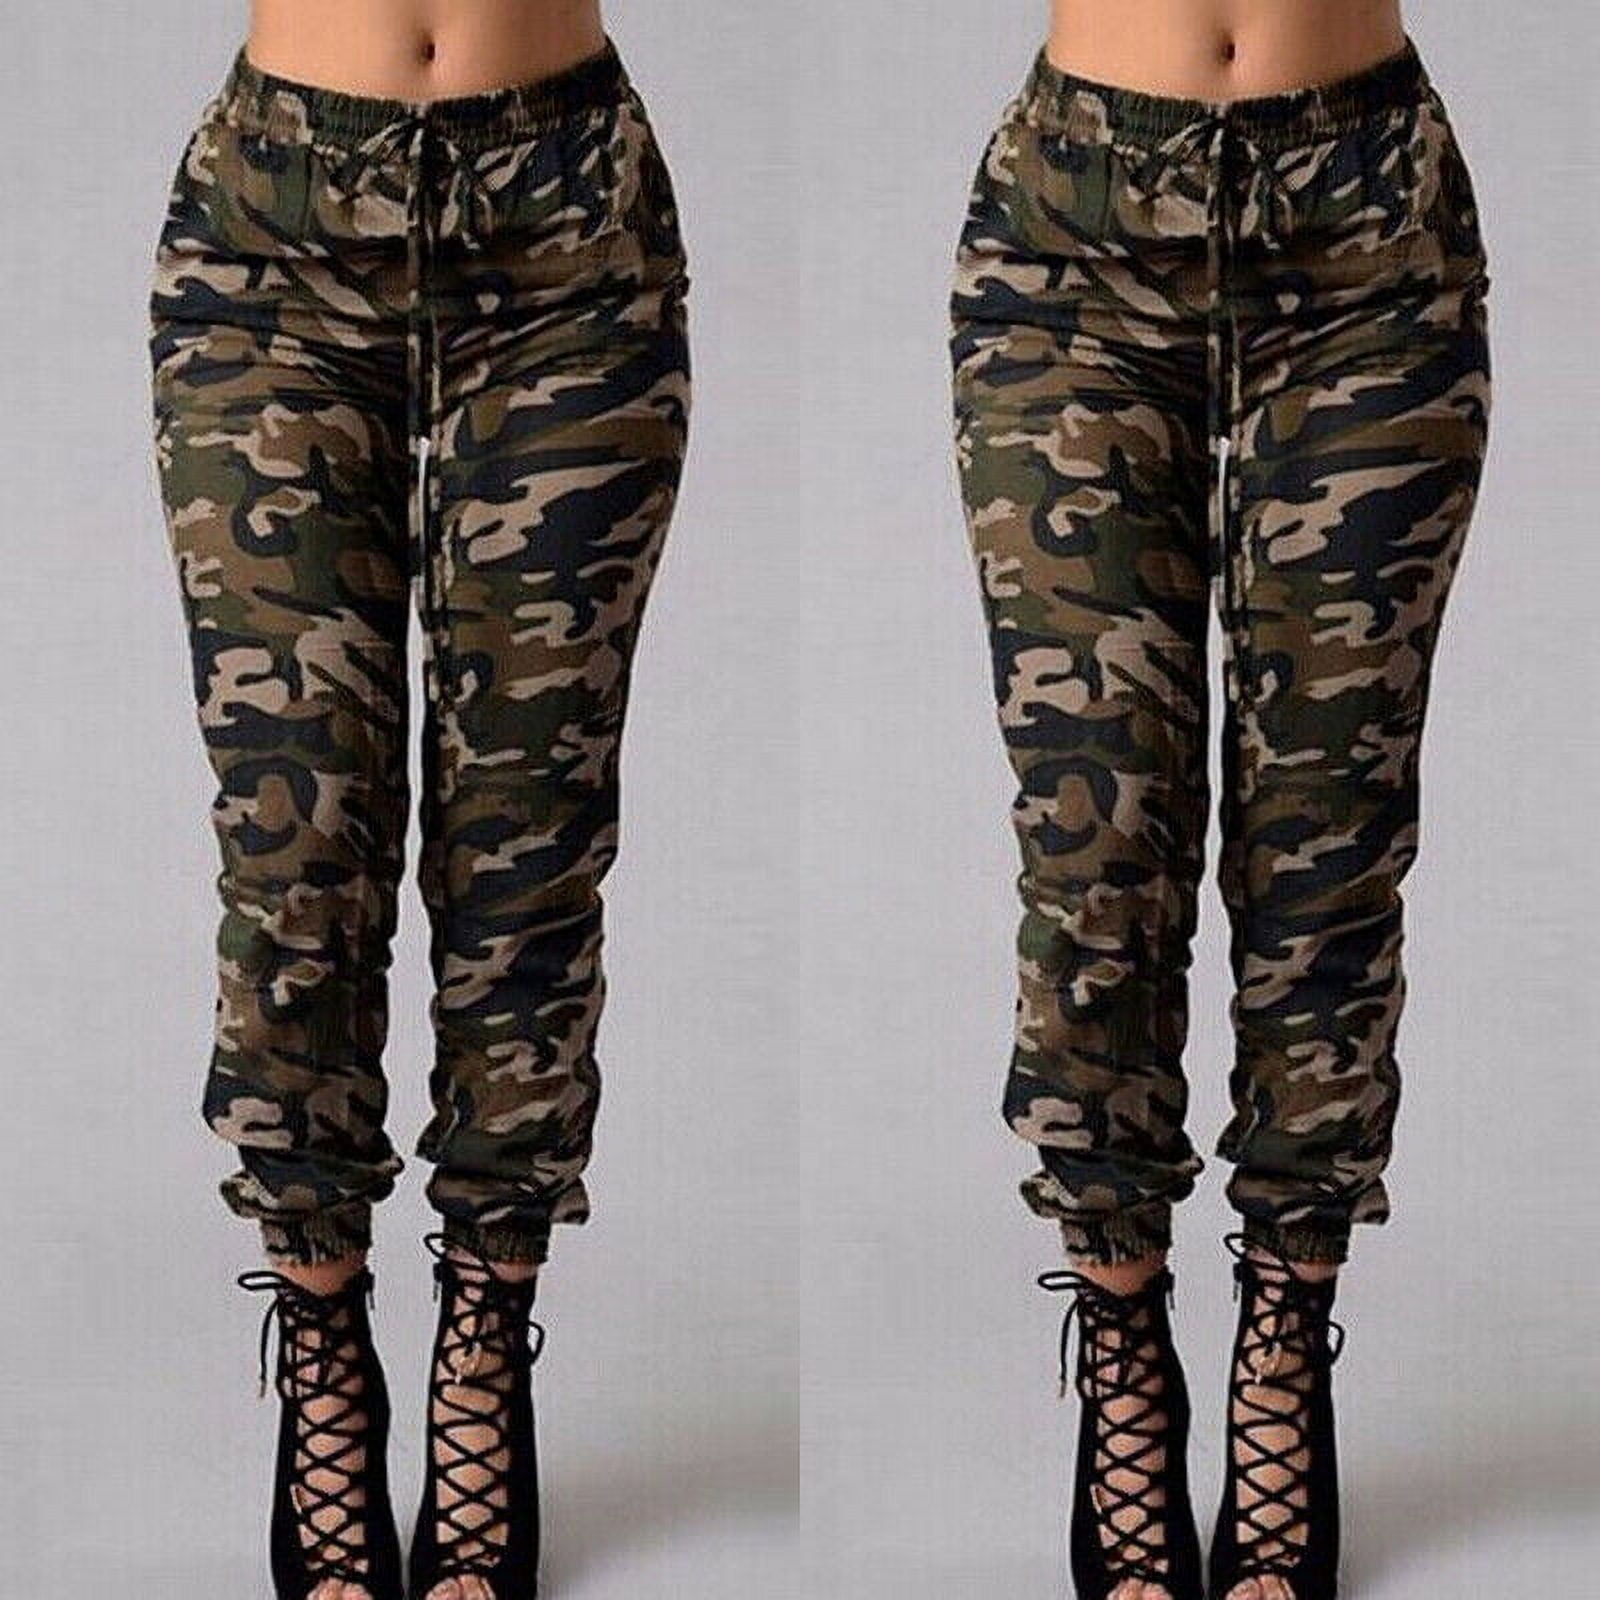 Plus Size Womens Camouflage Army Skinny Fit Stretchy Jeans